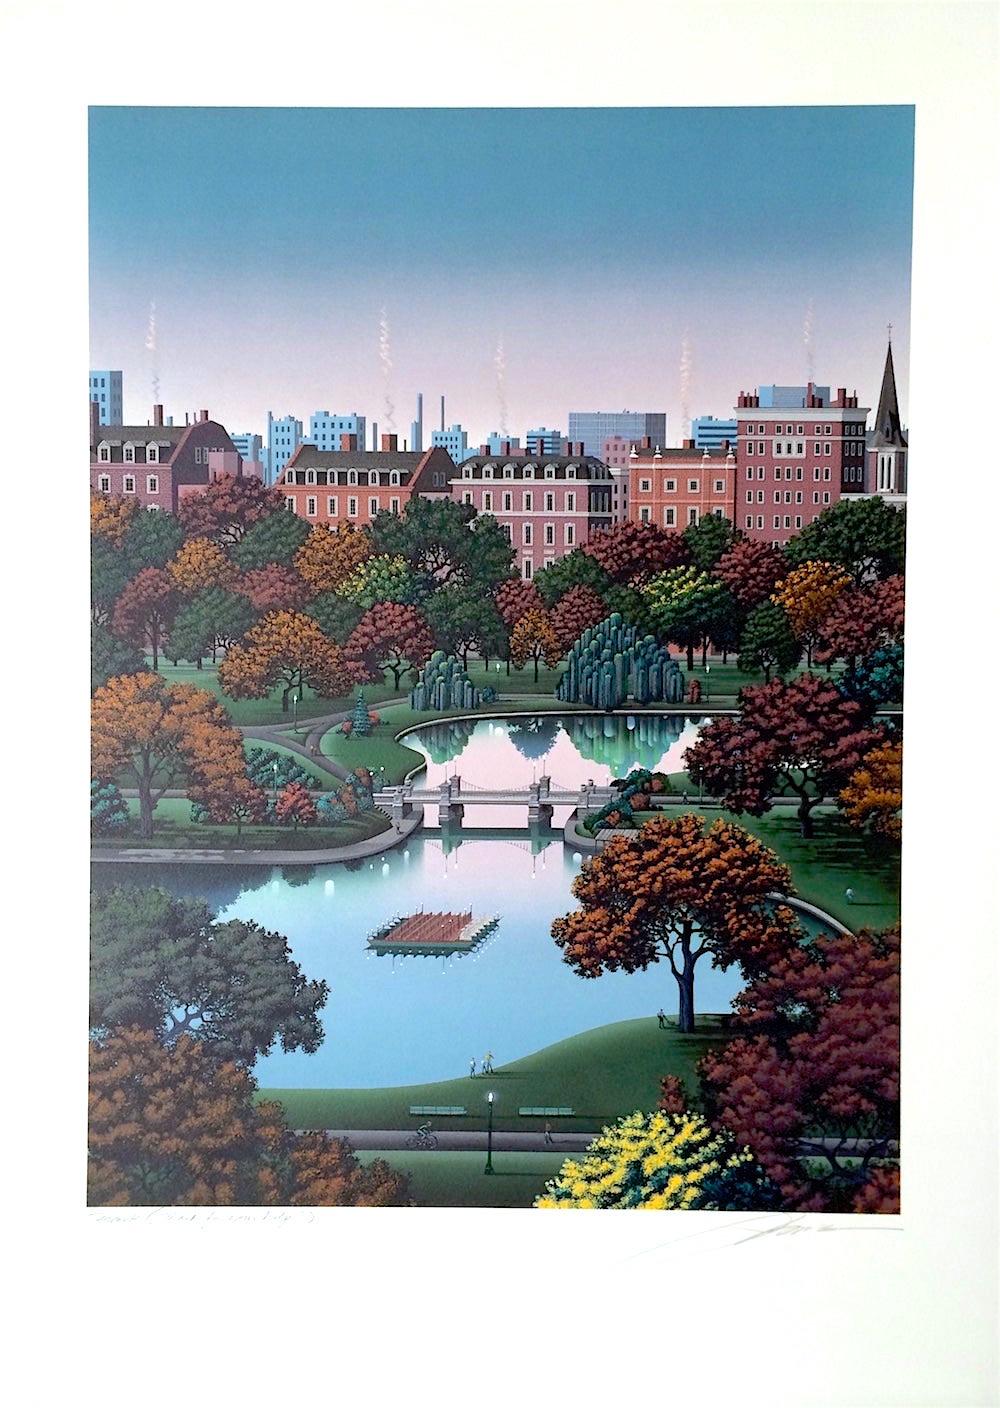 BOSTON PUBLIC GARDEN, Signed Hand Made Lithograph, Architectural Landscape - Print by Jim Buckels